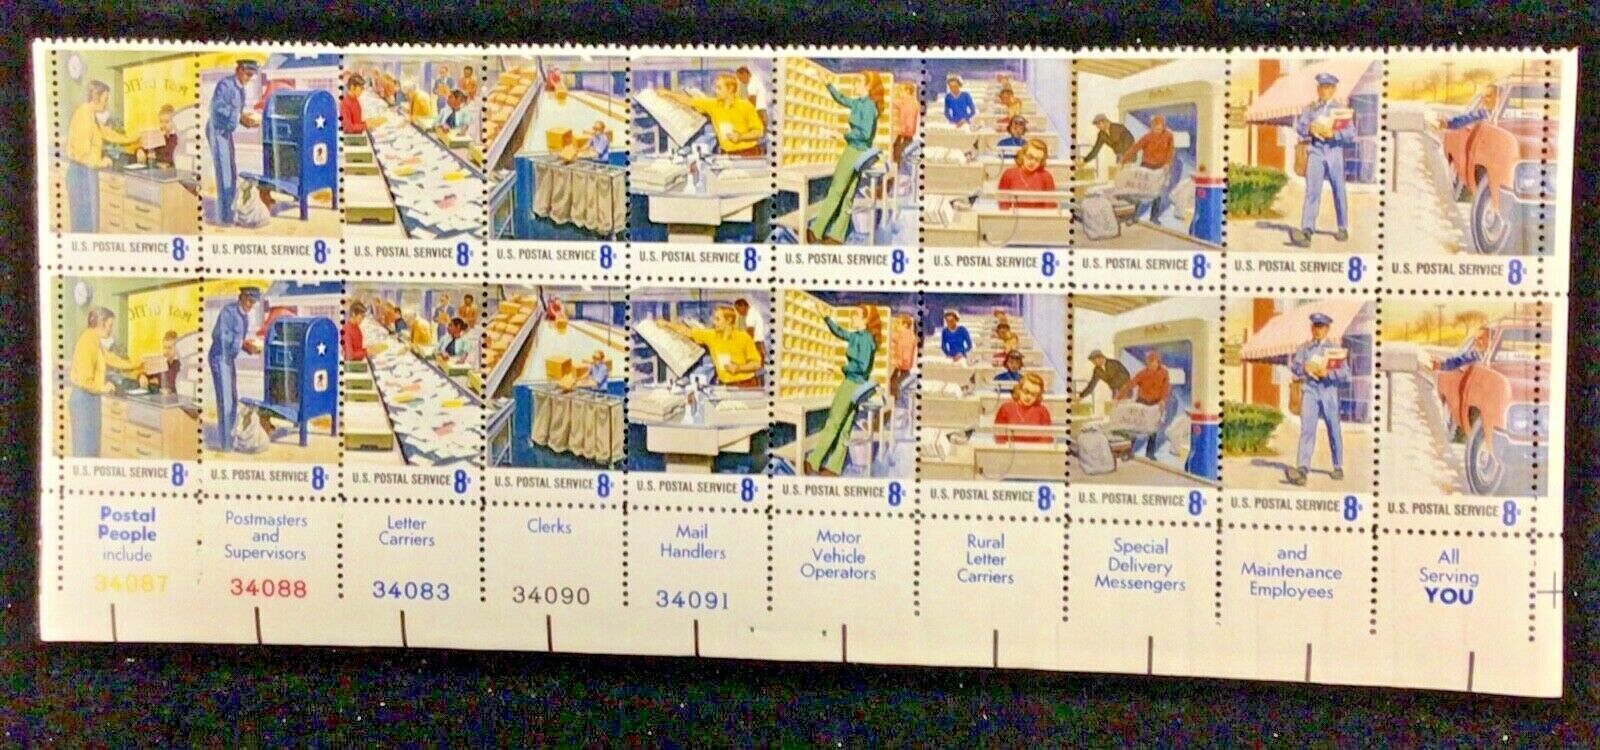 1973 POSTAL SERVICE EMPLOYEES #1498a Plate Block of 20 x 8 cents US Postage  Stamps